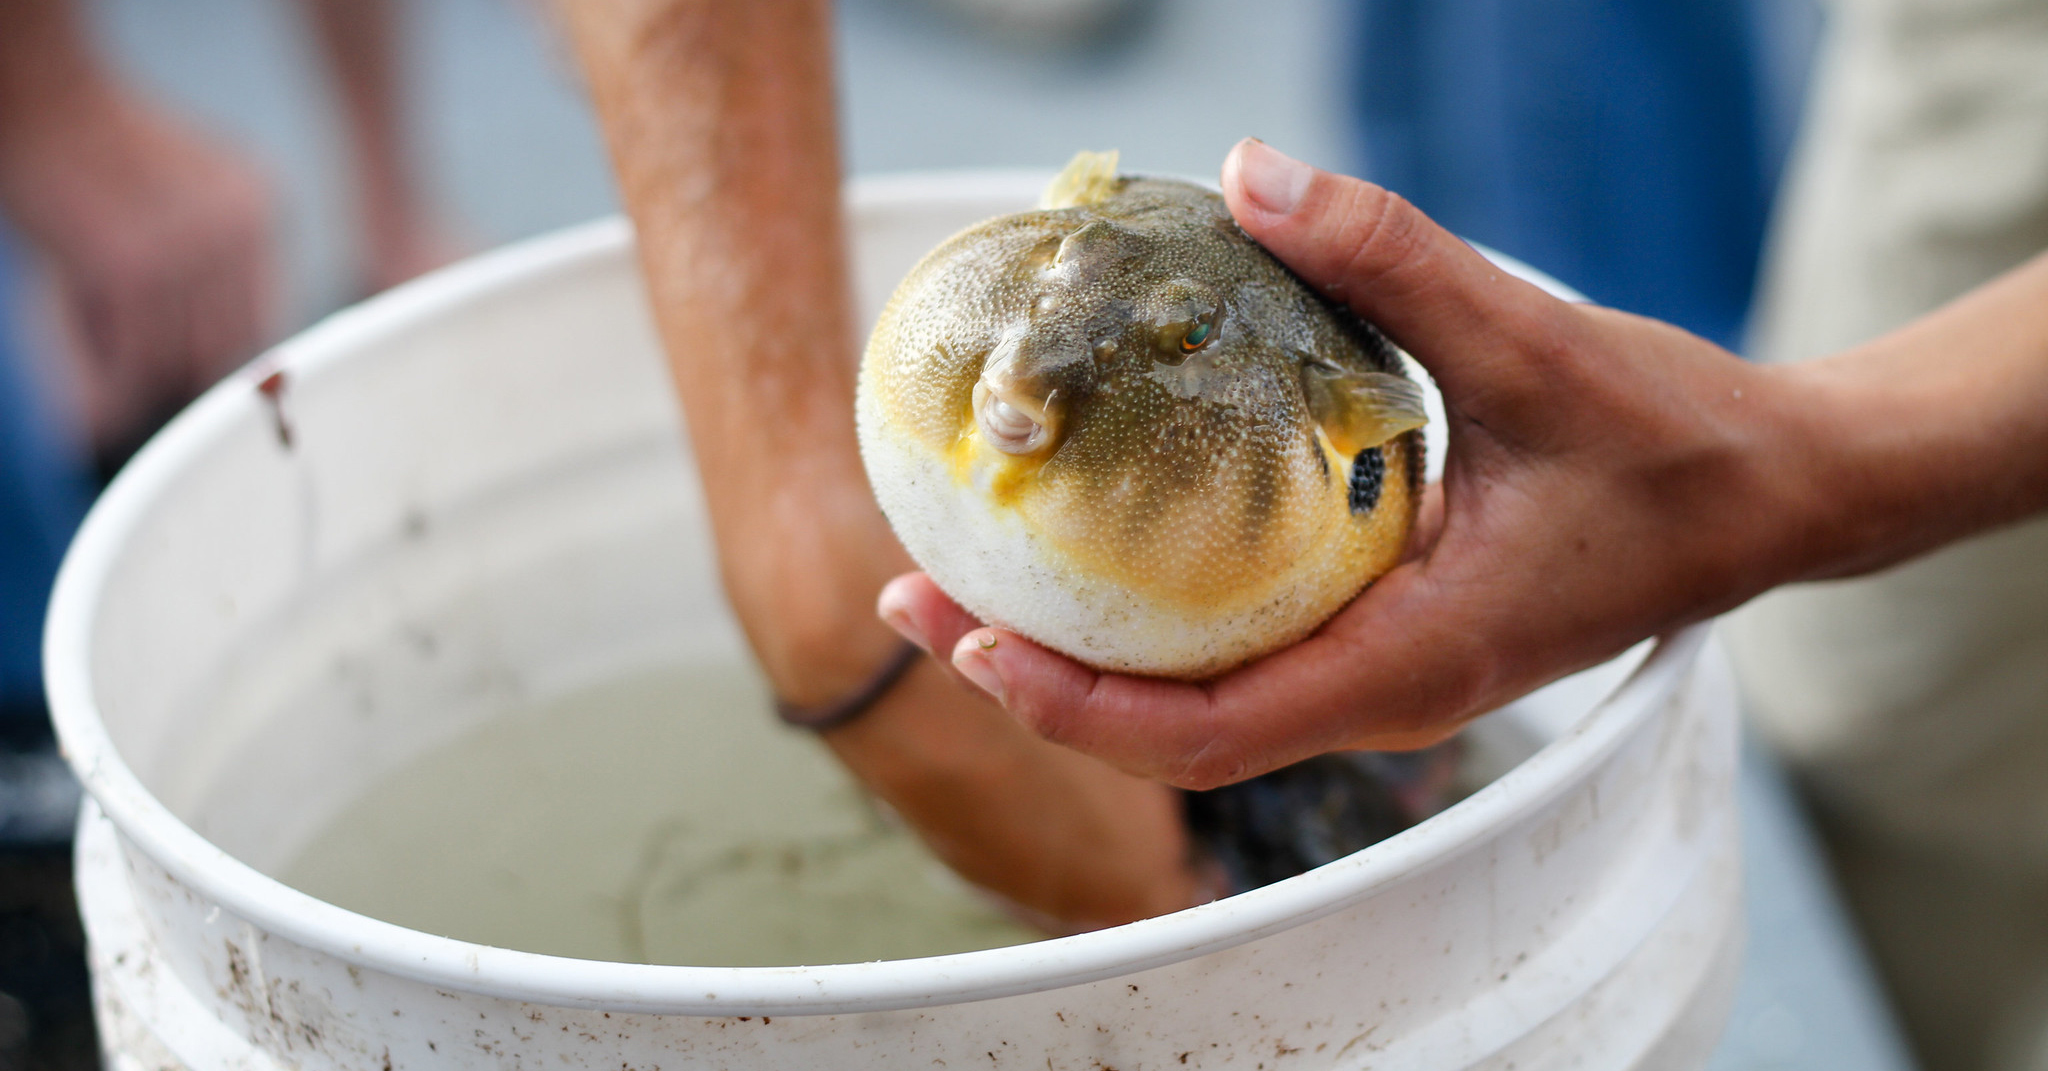 A northern pufferfish caught in the northeast.